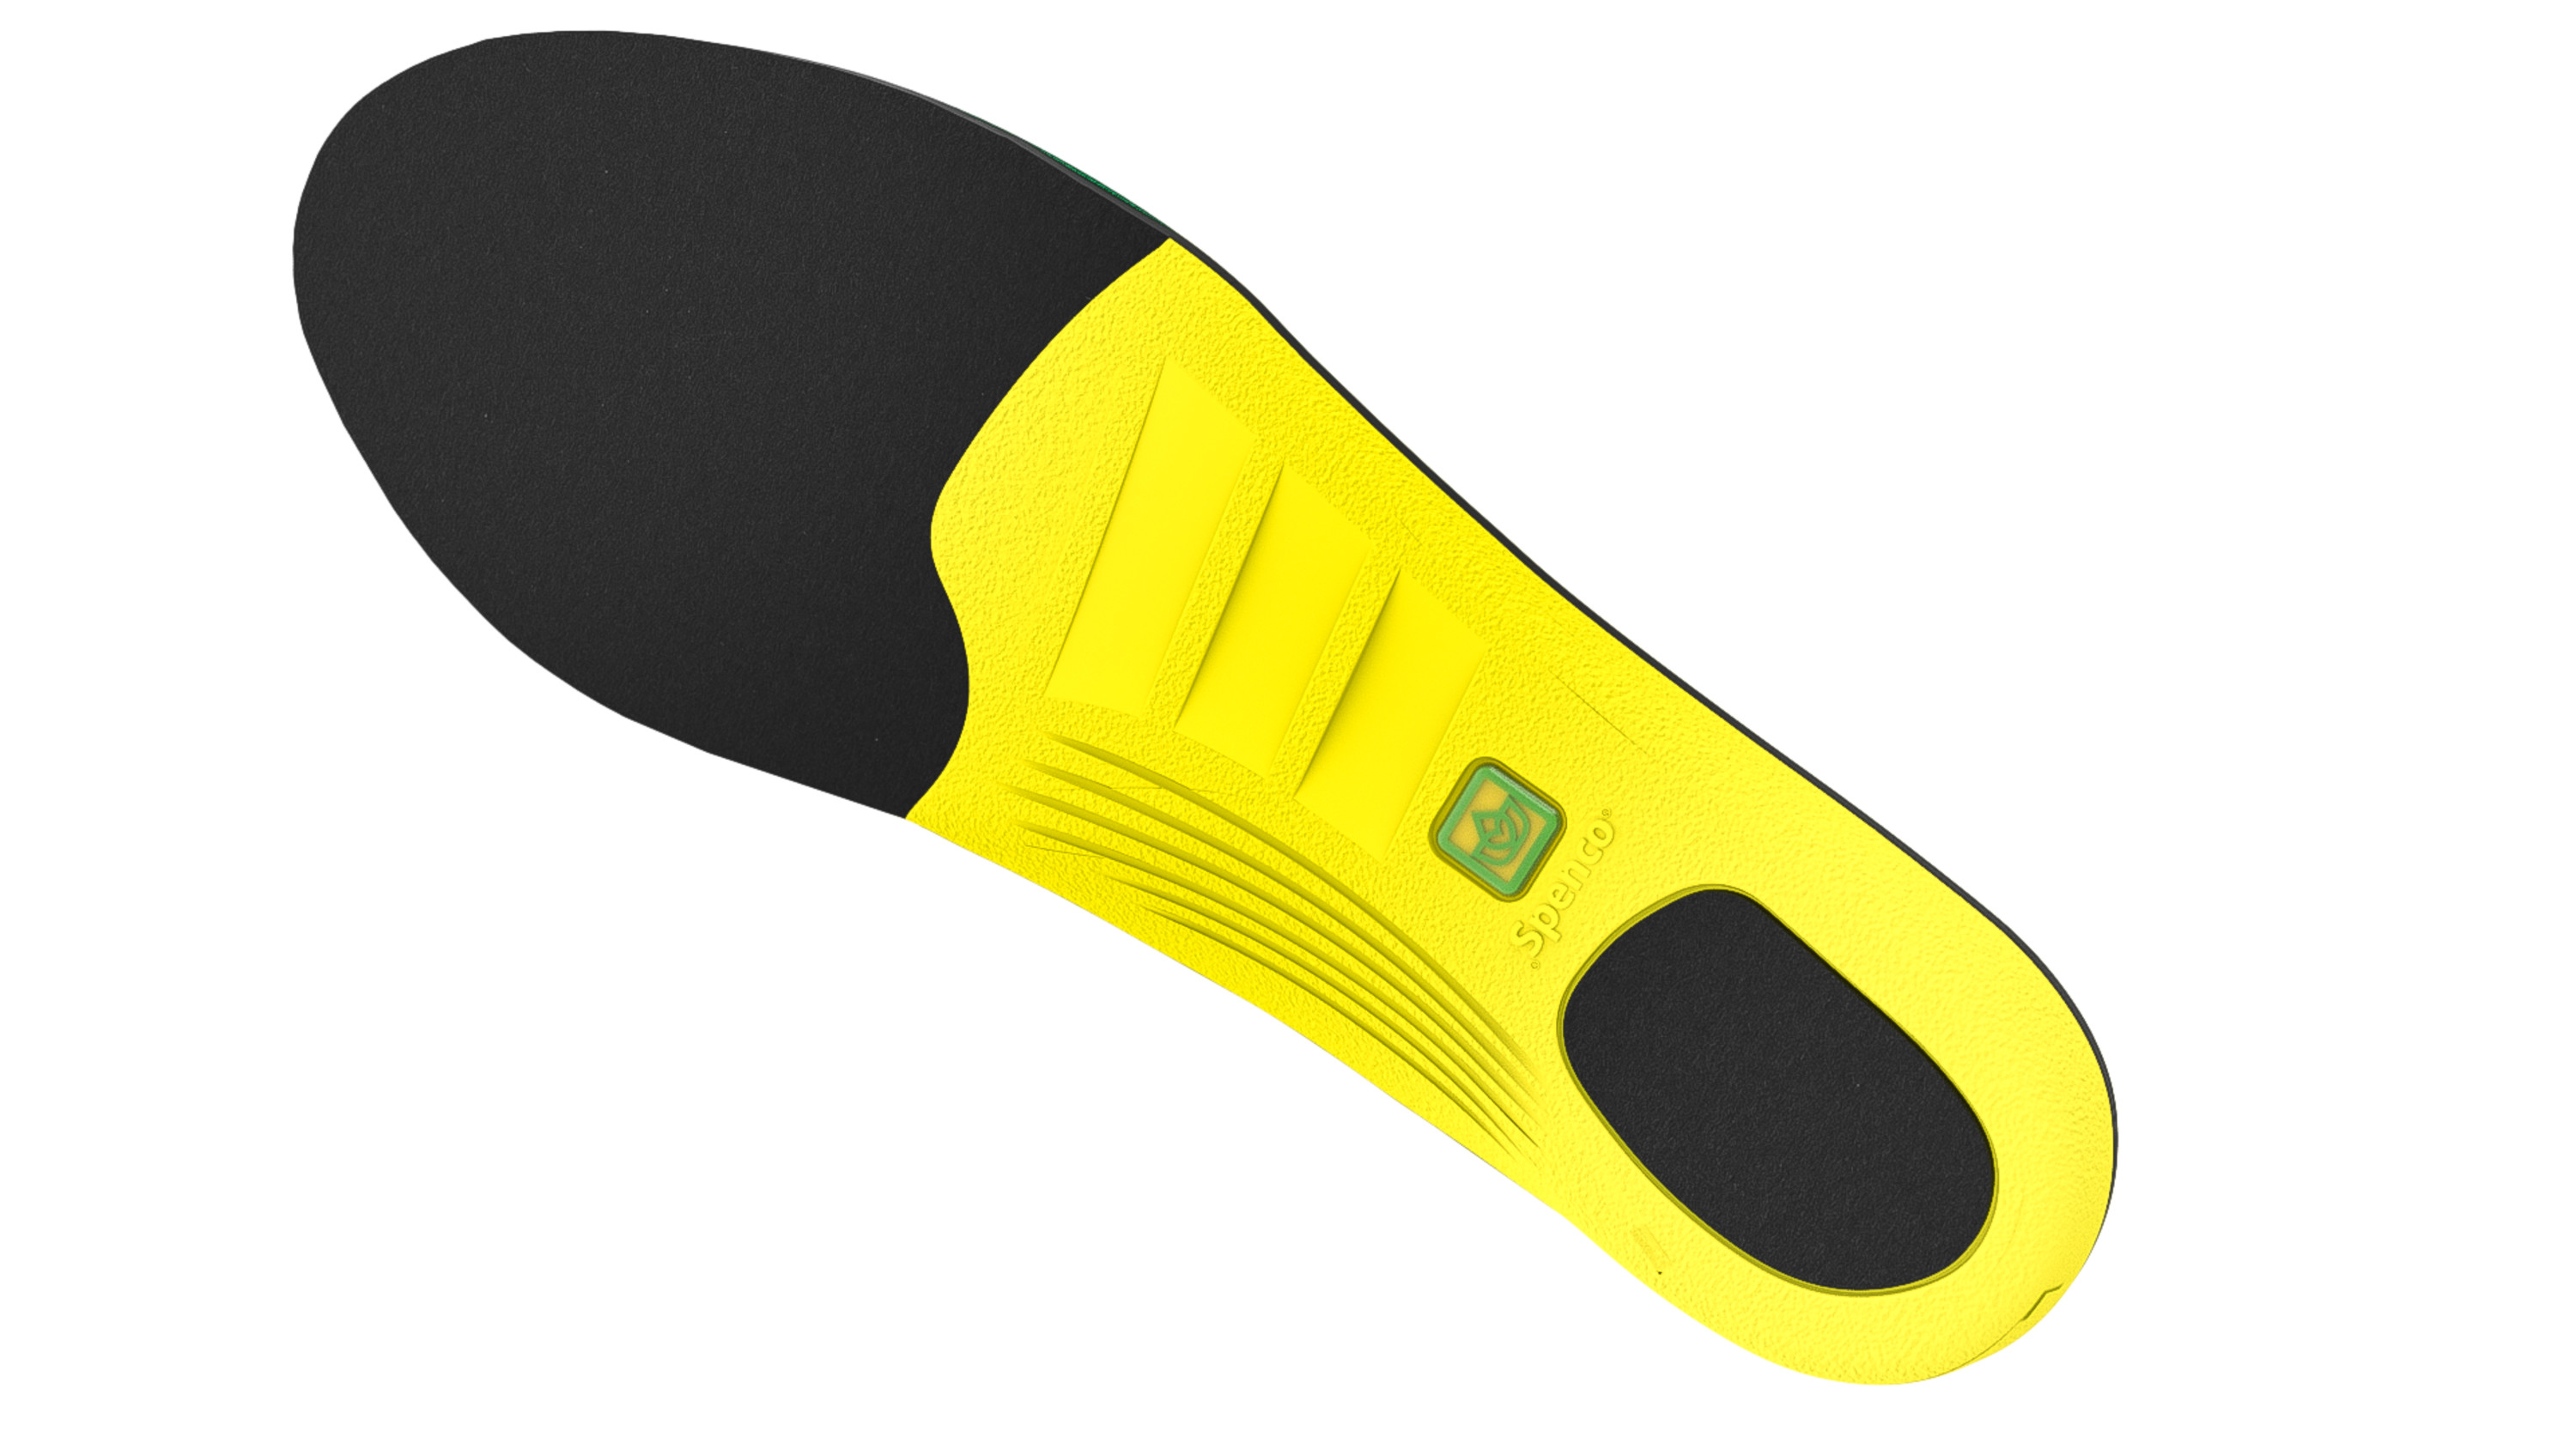 Spenco Polysorb Cross Trainer Insole - image 4 of 5